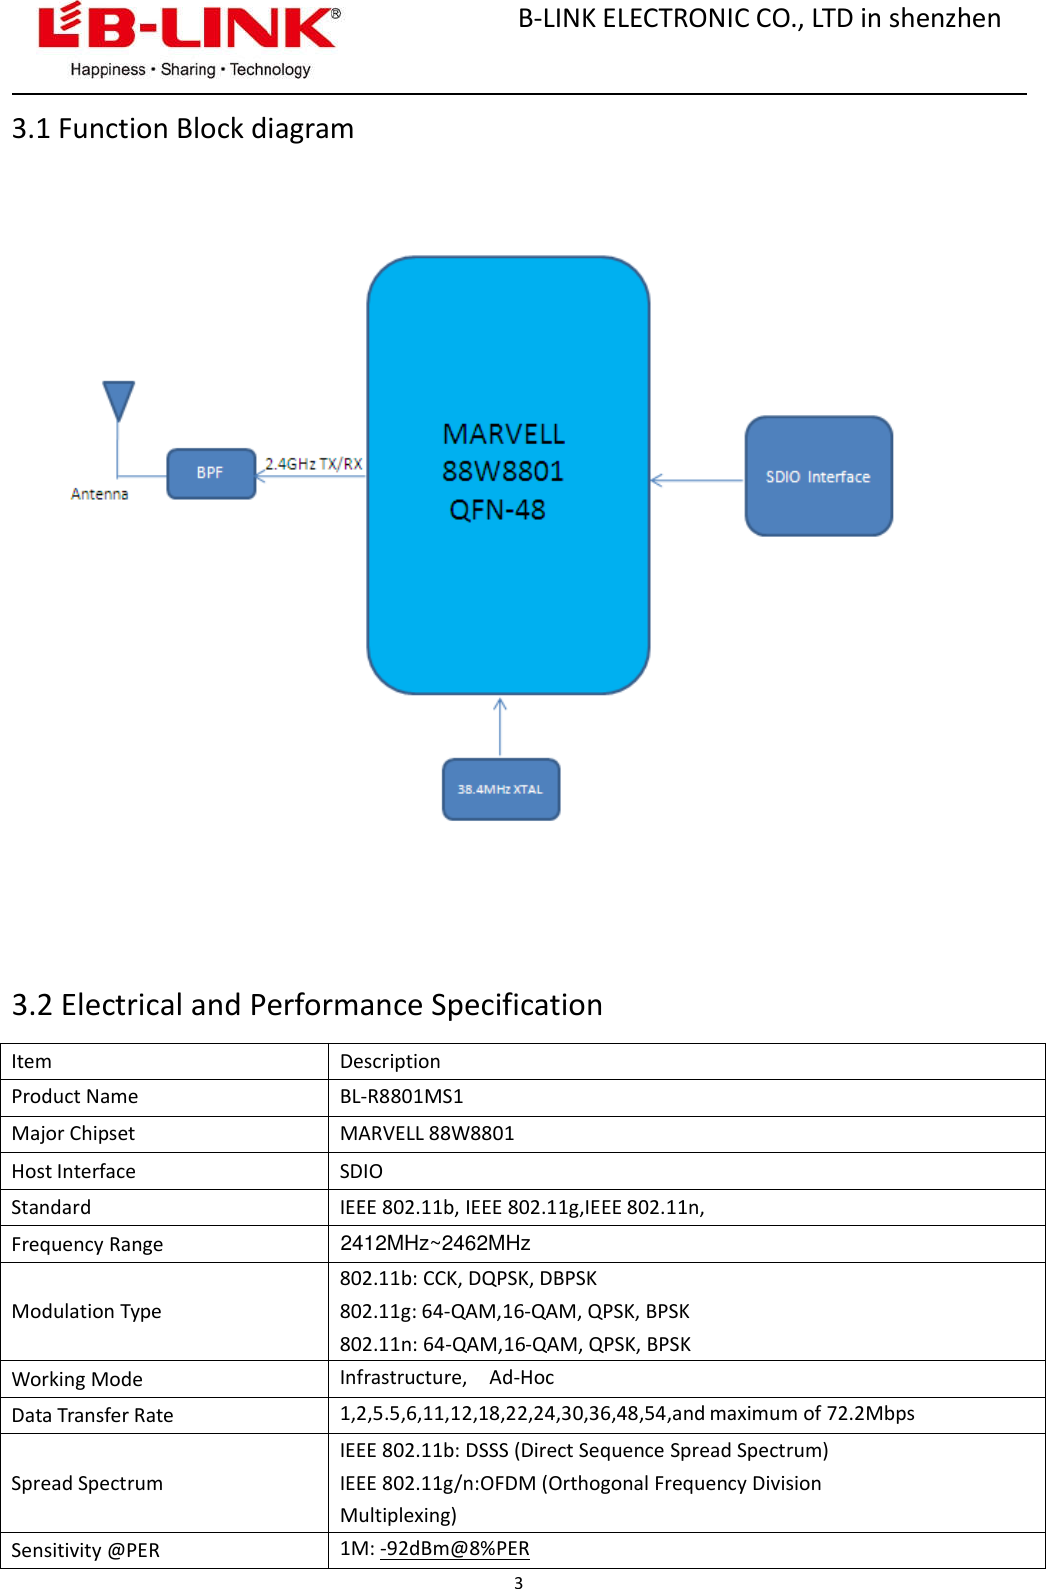 B-LINK ELECTRONIC CO., LTD in shenzhen33.1 Function Block diagram3.2 Electrical and Performance SpecificationItem DescriptionProduct Name BL-R8801MS1Major Chipset MARVELL 88W8801Host Interface SDIOStandard IEEE 802.11b, IEEE 802.11g,IEEE 802.11n,Frequency RangeModulation Type802.11b: CCK, DQPSK, DBPSK802.11g: 64-QAM,16-QAM, QPSK, BPSK802.11n: 64-QAM,16-QAM, QPSK, BPSKWorking Mode Infrastructure, Ad-HocData Transfer Rate 1,2,5.5,6,11,12,18,22,24,30,36,48,54,and maximum of 72.2MbpsSpread SpectrumIEEE 802.11b: DSSS (Direct Sequence Spread Spectrum)IEEE 802.11g/n:OFDM (Orthogonal Frequency DivisionMultiplexing)Sensitivity @PER 1M: -92dBm@8%PER2412MHz~2462MHz